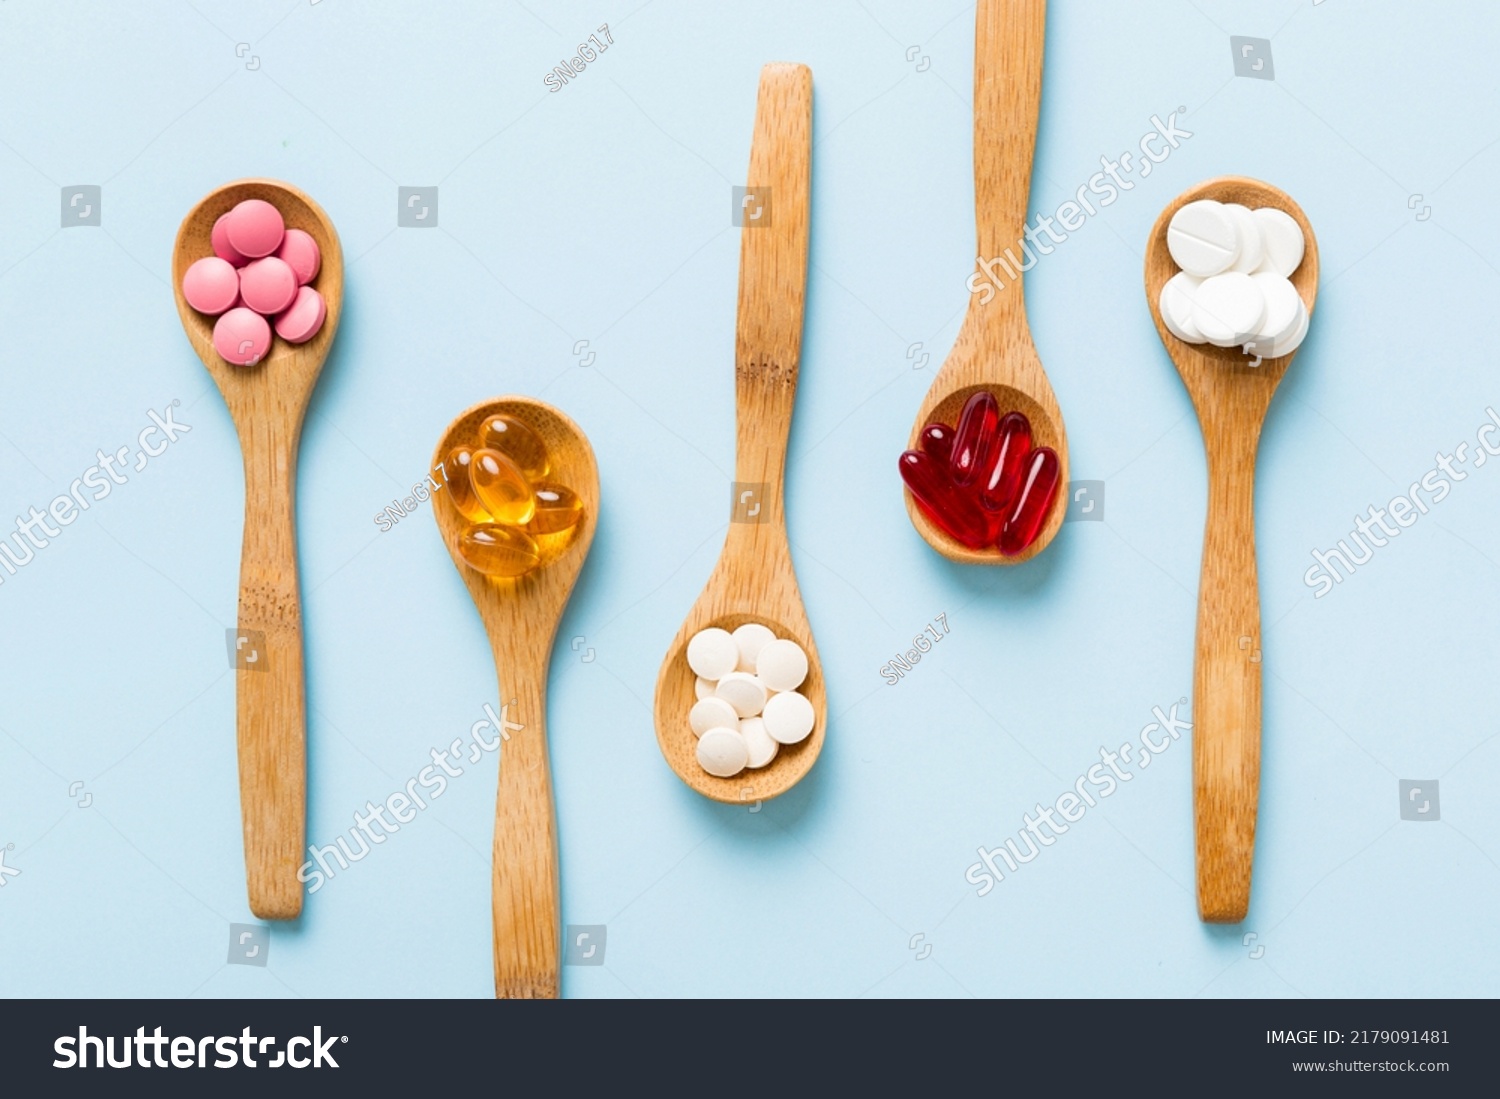 Vitamin capsules in a spoon on a colored background. Pills served as a healthy meal. Red soft gel vitamin supplement capsules on spoon. #2179091481